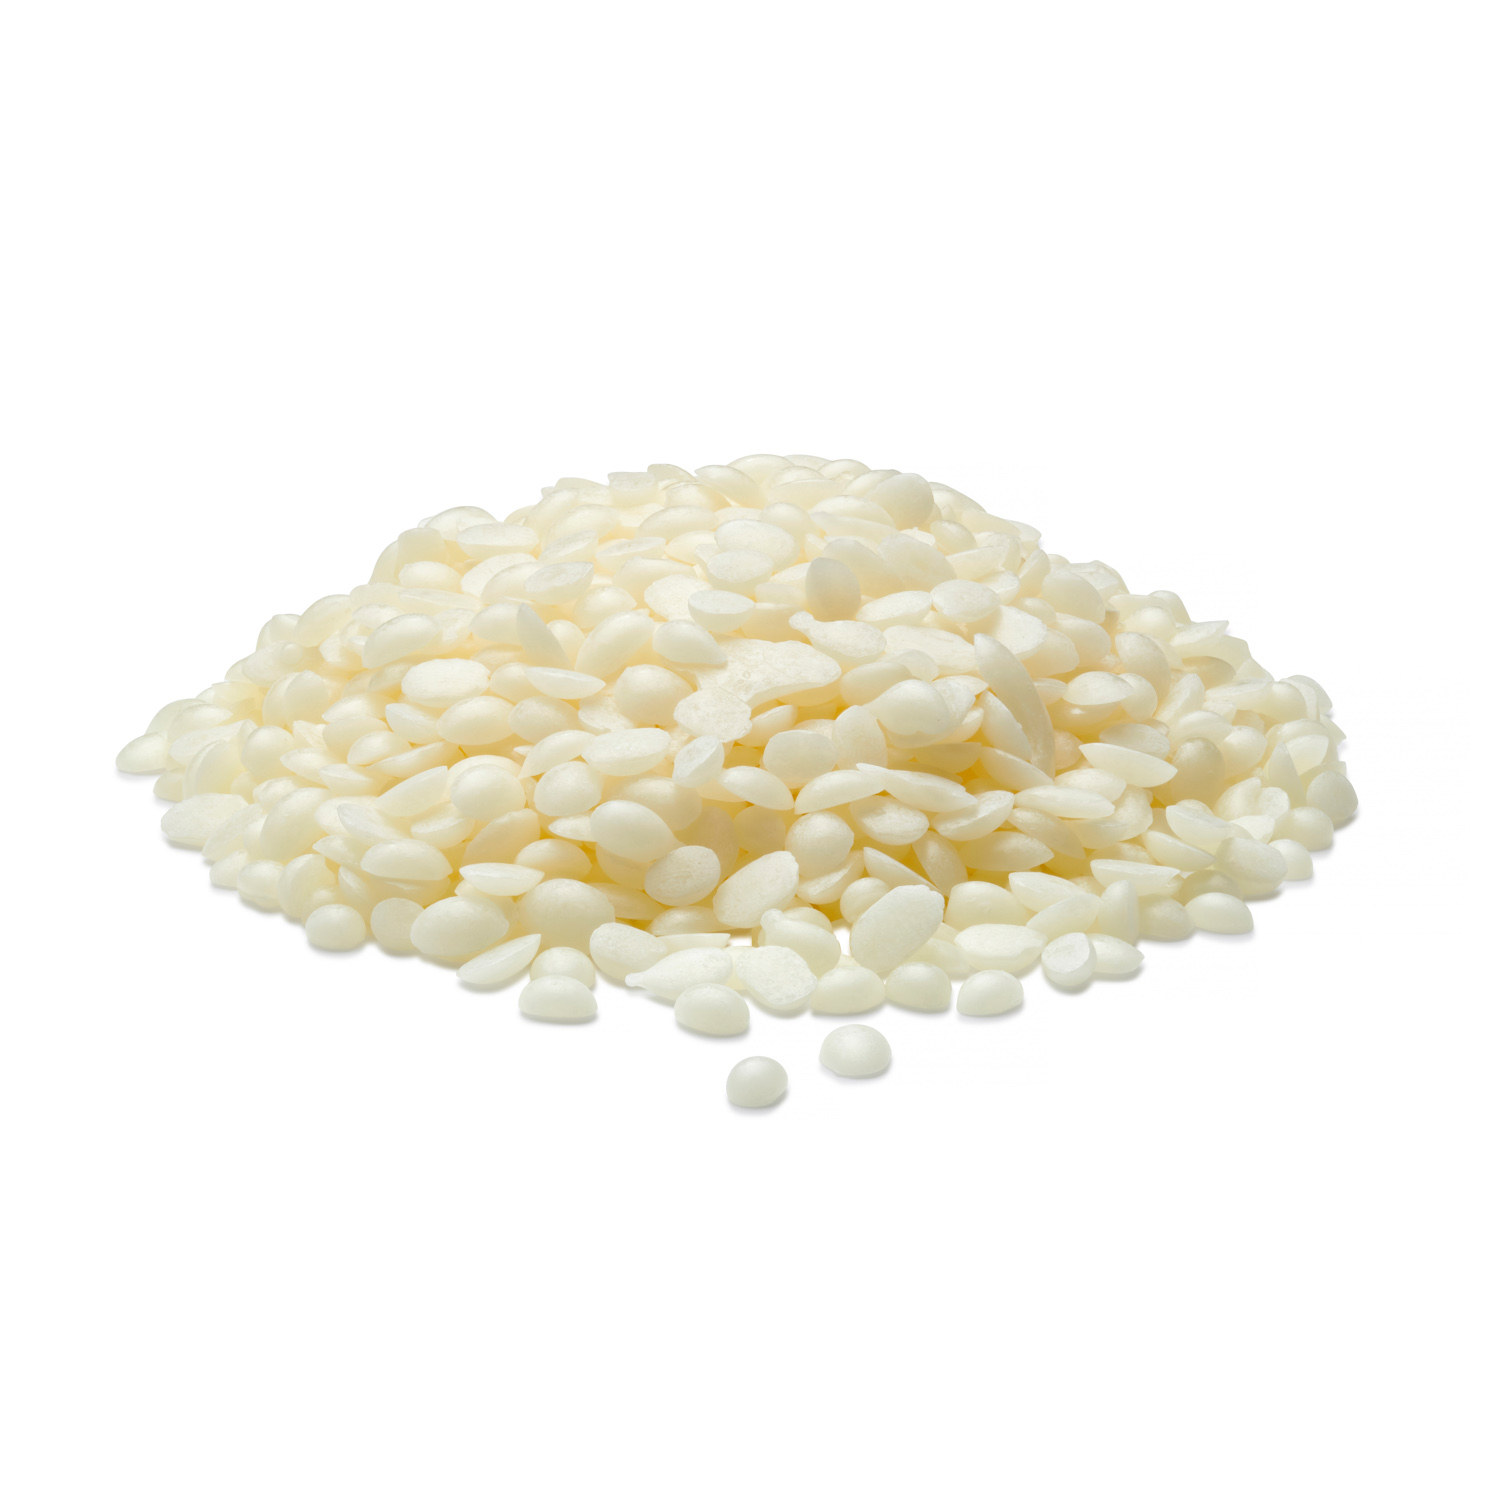 Pellets of Food Grade White Beeswax